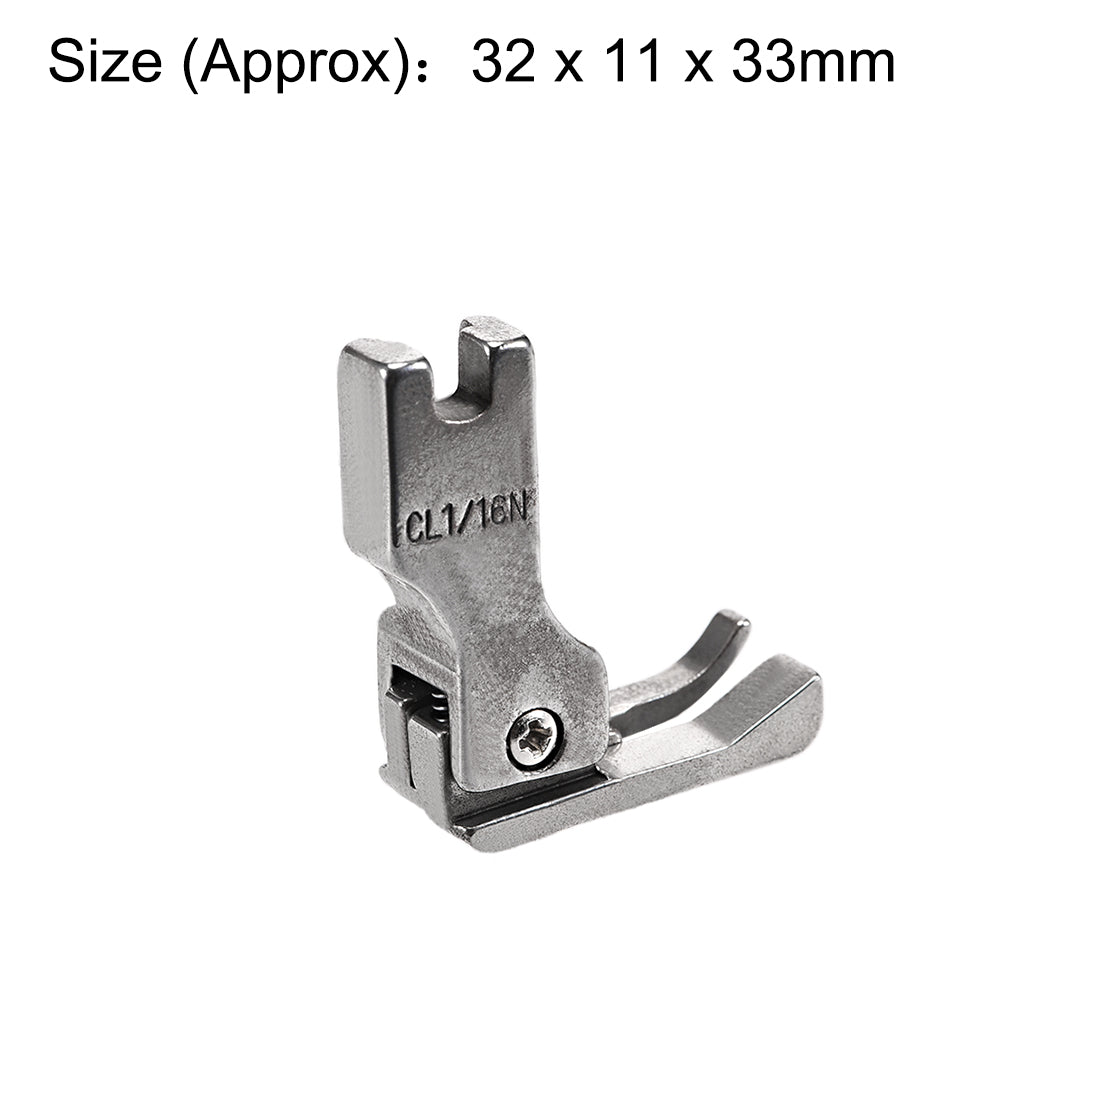 uxcell Uxcell Left Compensating Presser Foot Fit for Industrial Sewing Machines (1/16")